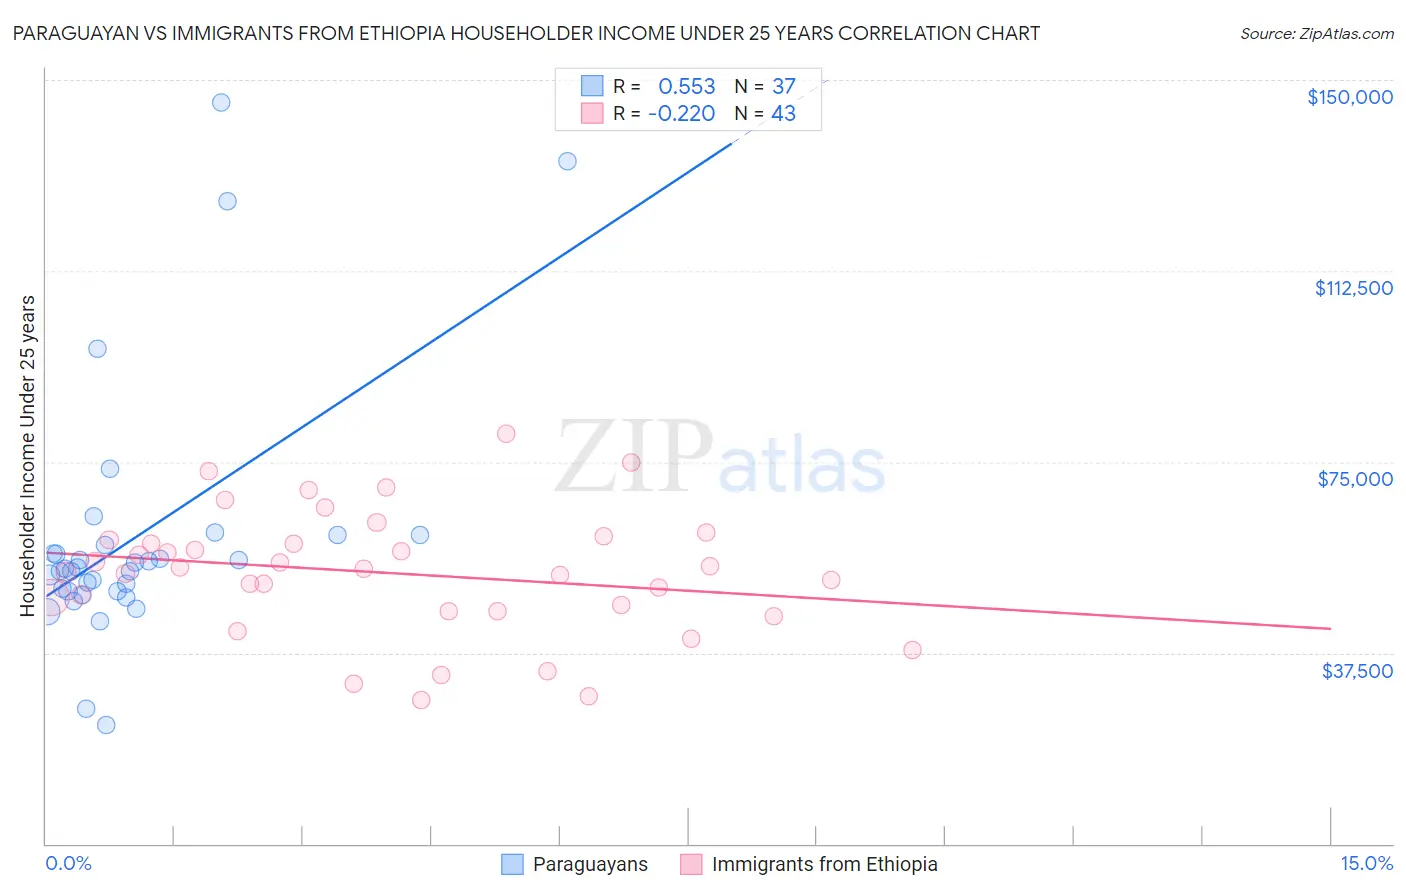 Paraguayan vs Immigrants from Ethiopia Householder Income Under 25 years